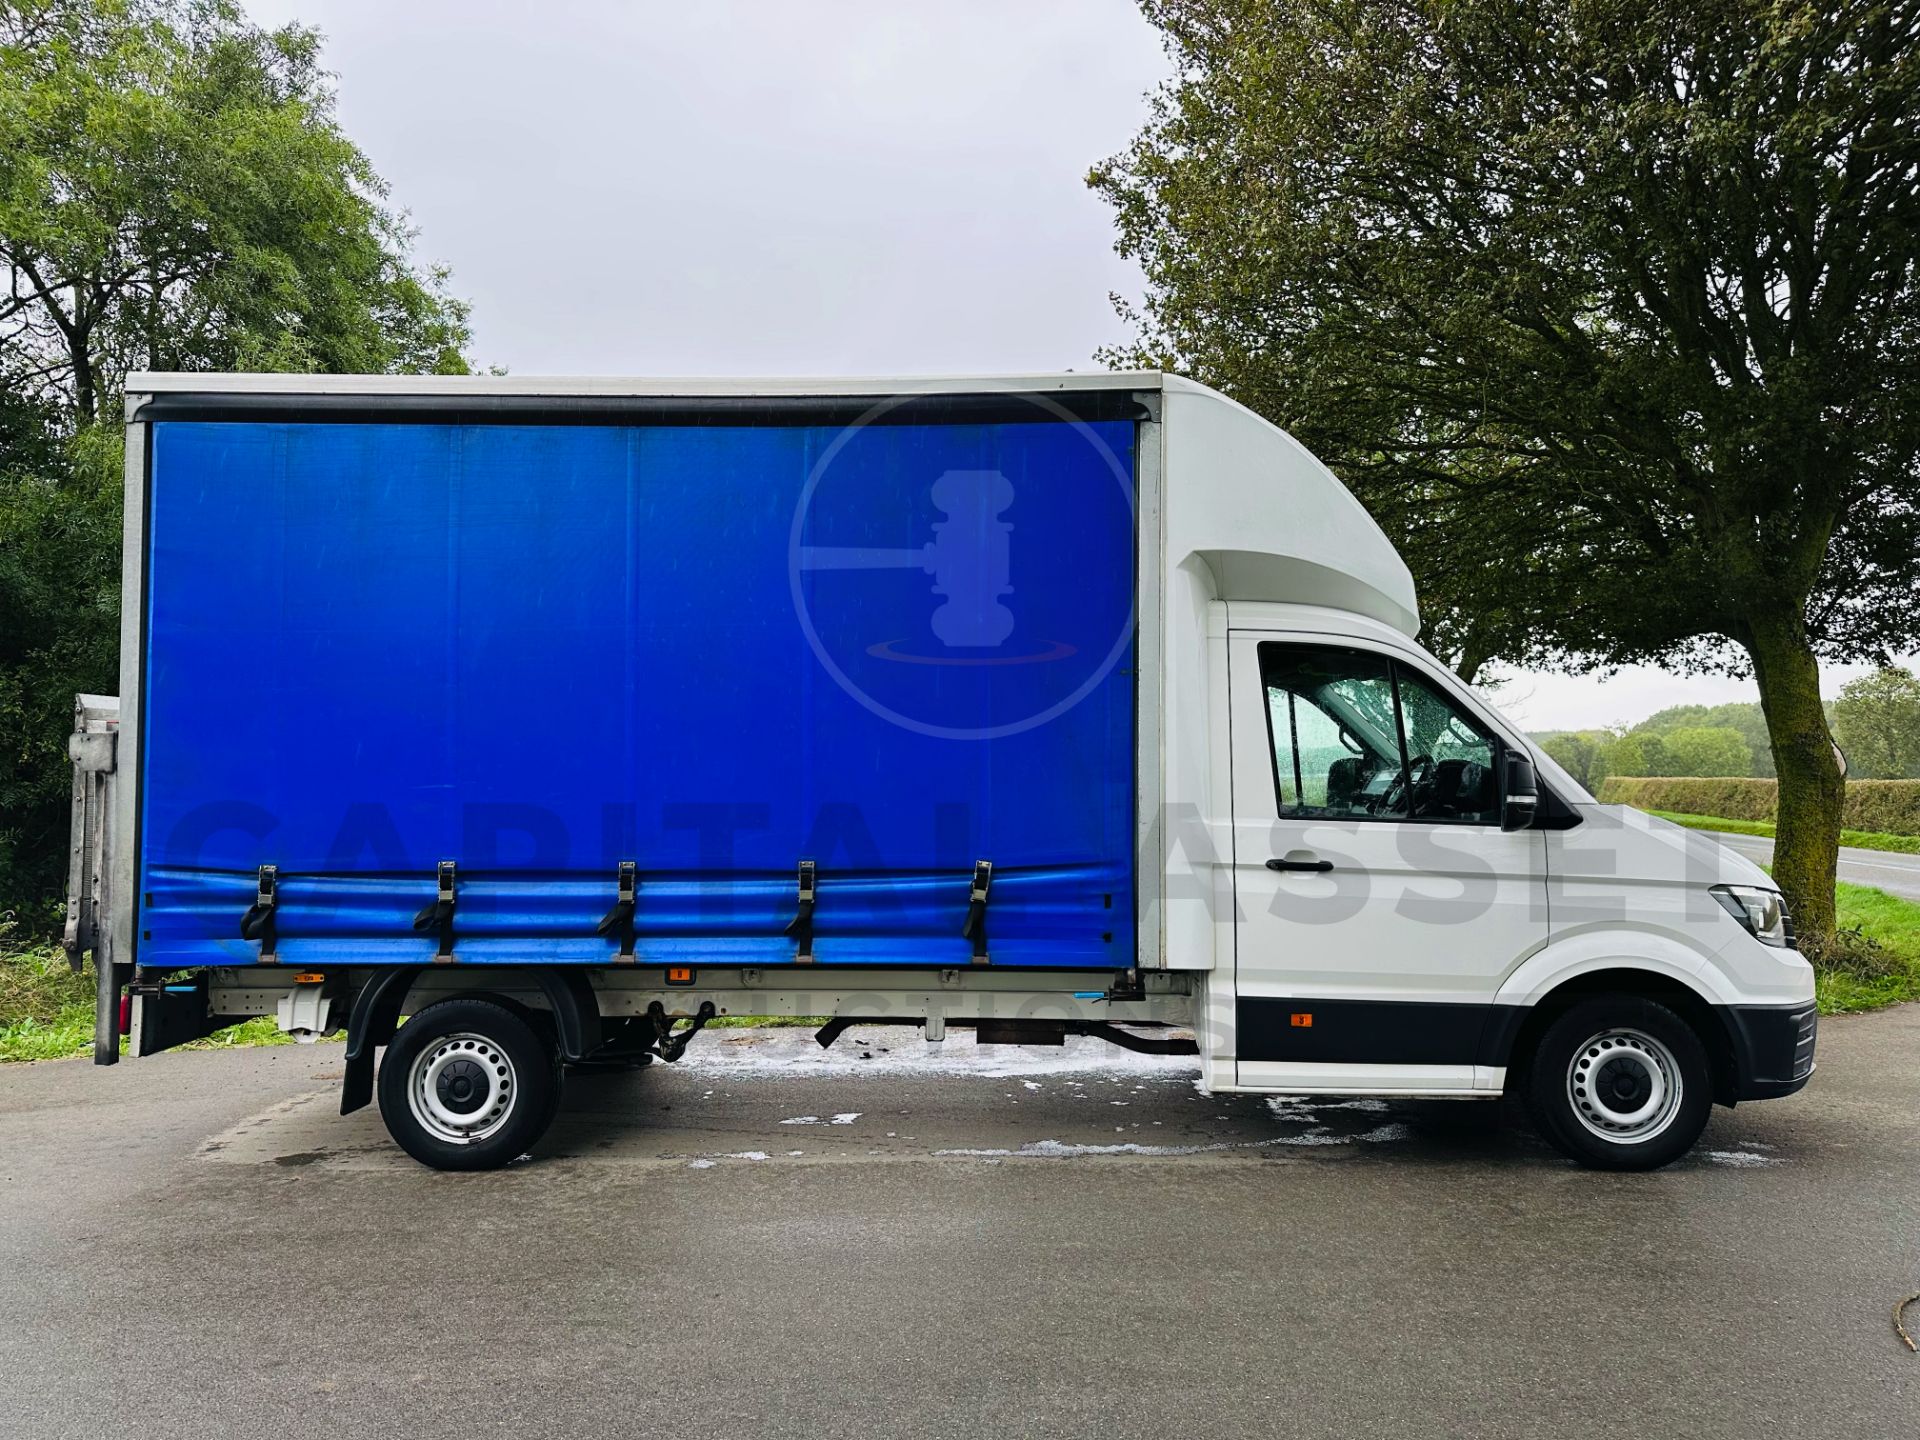 (On Sale) VOLKSWAGEN CRAFTER CR35 *LWB - CURTAIN SIDE* (69 REG - EURO 6) 2.0 TDI *EURO 6* (1 OWNER) - Image 13 of 26